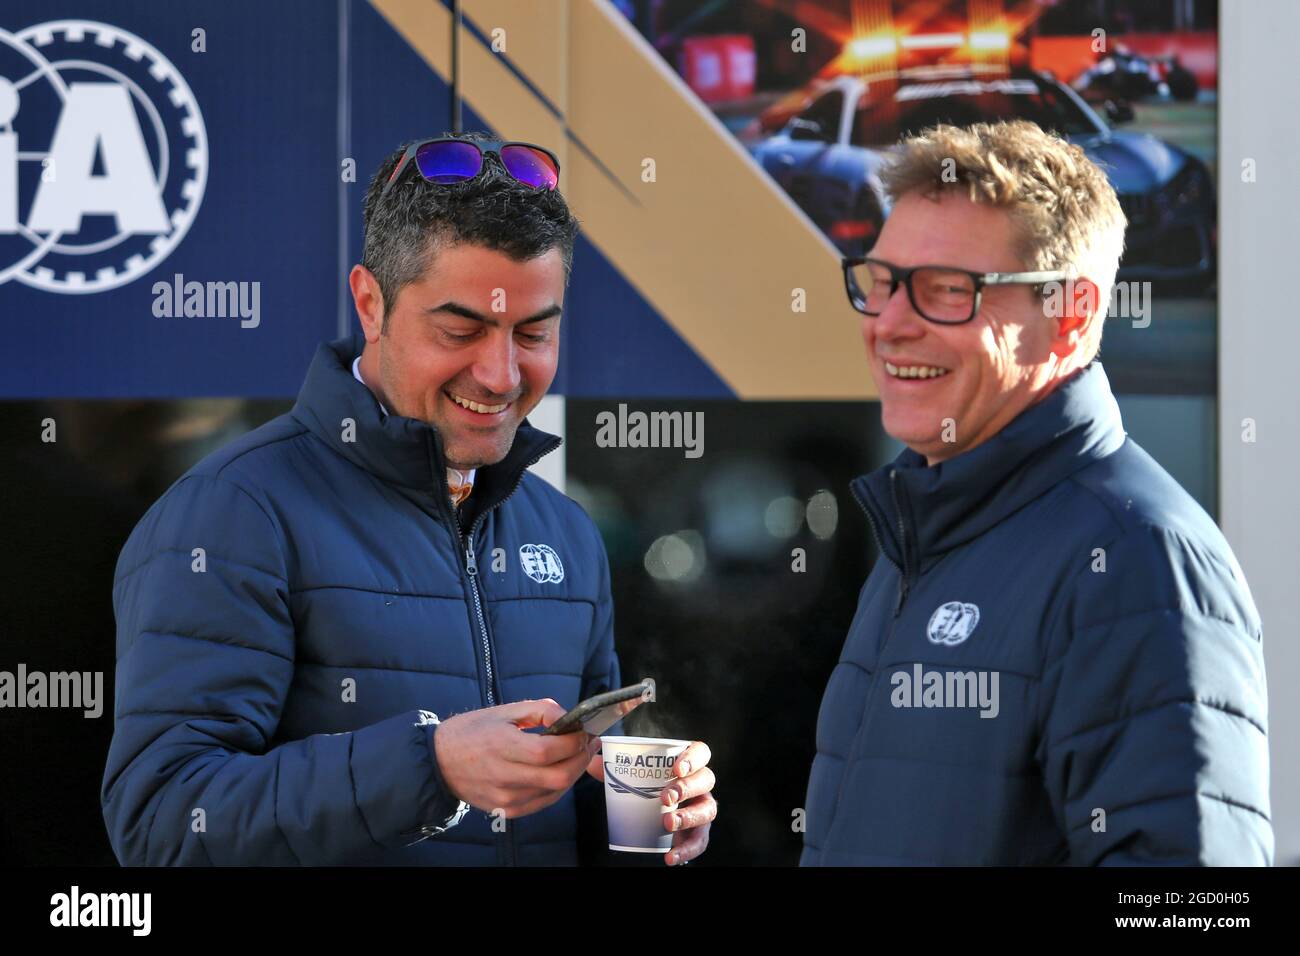 (L to R): Michael Masi (AUS) FIA Race Director with Bernd Maylander (GER) FIA Safety Car Driver. United States Grand Prix, Friday 1st November 2019. Circuit of the Americas, Austin, Texas, USA. Stock Photo